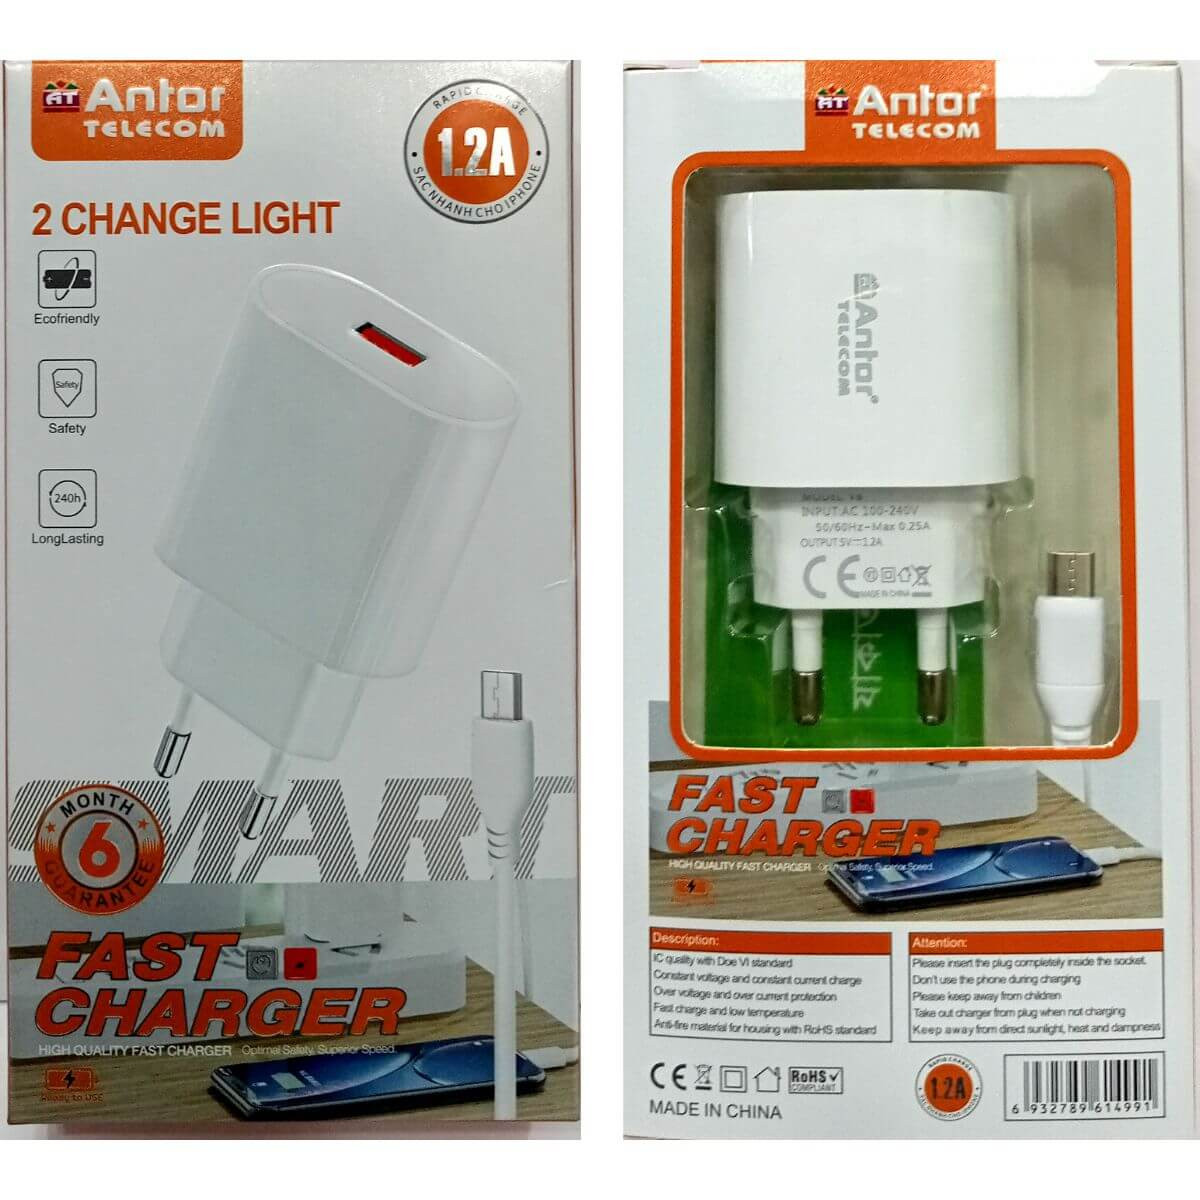 Antor 1.2A Micro USB Android ChargerBD